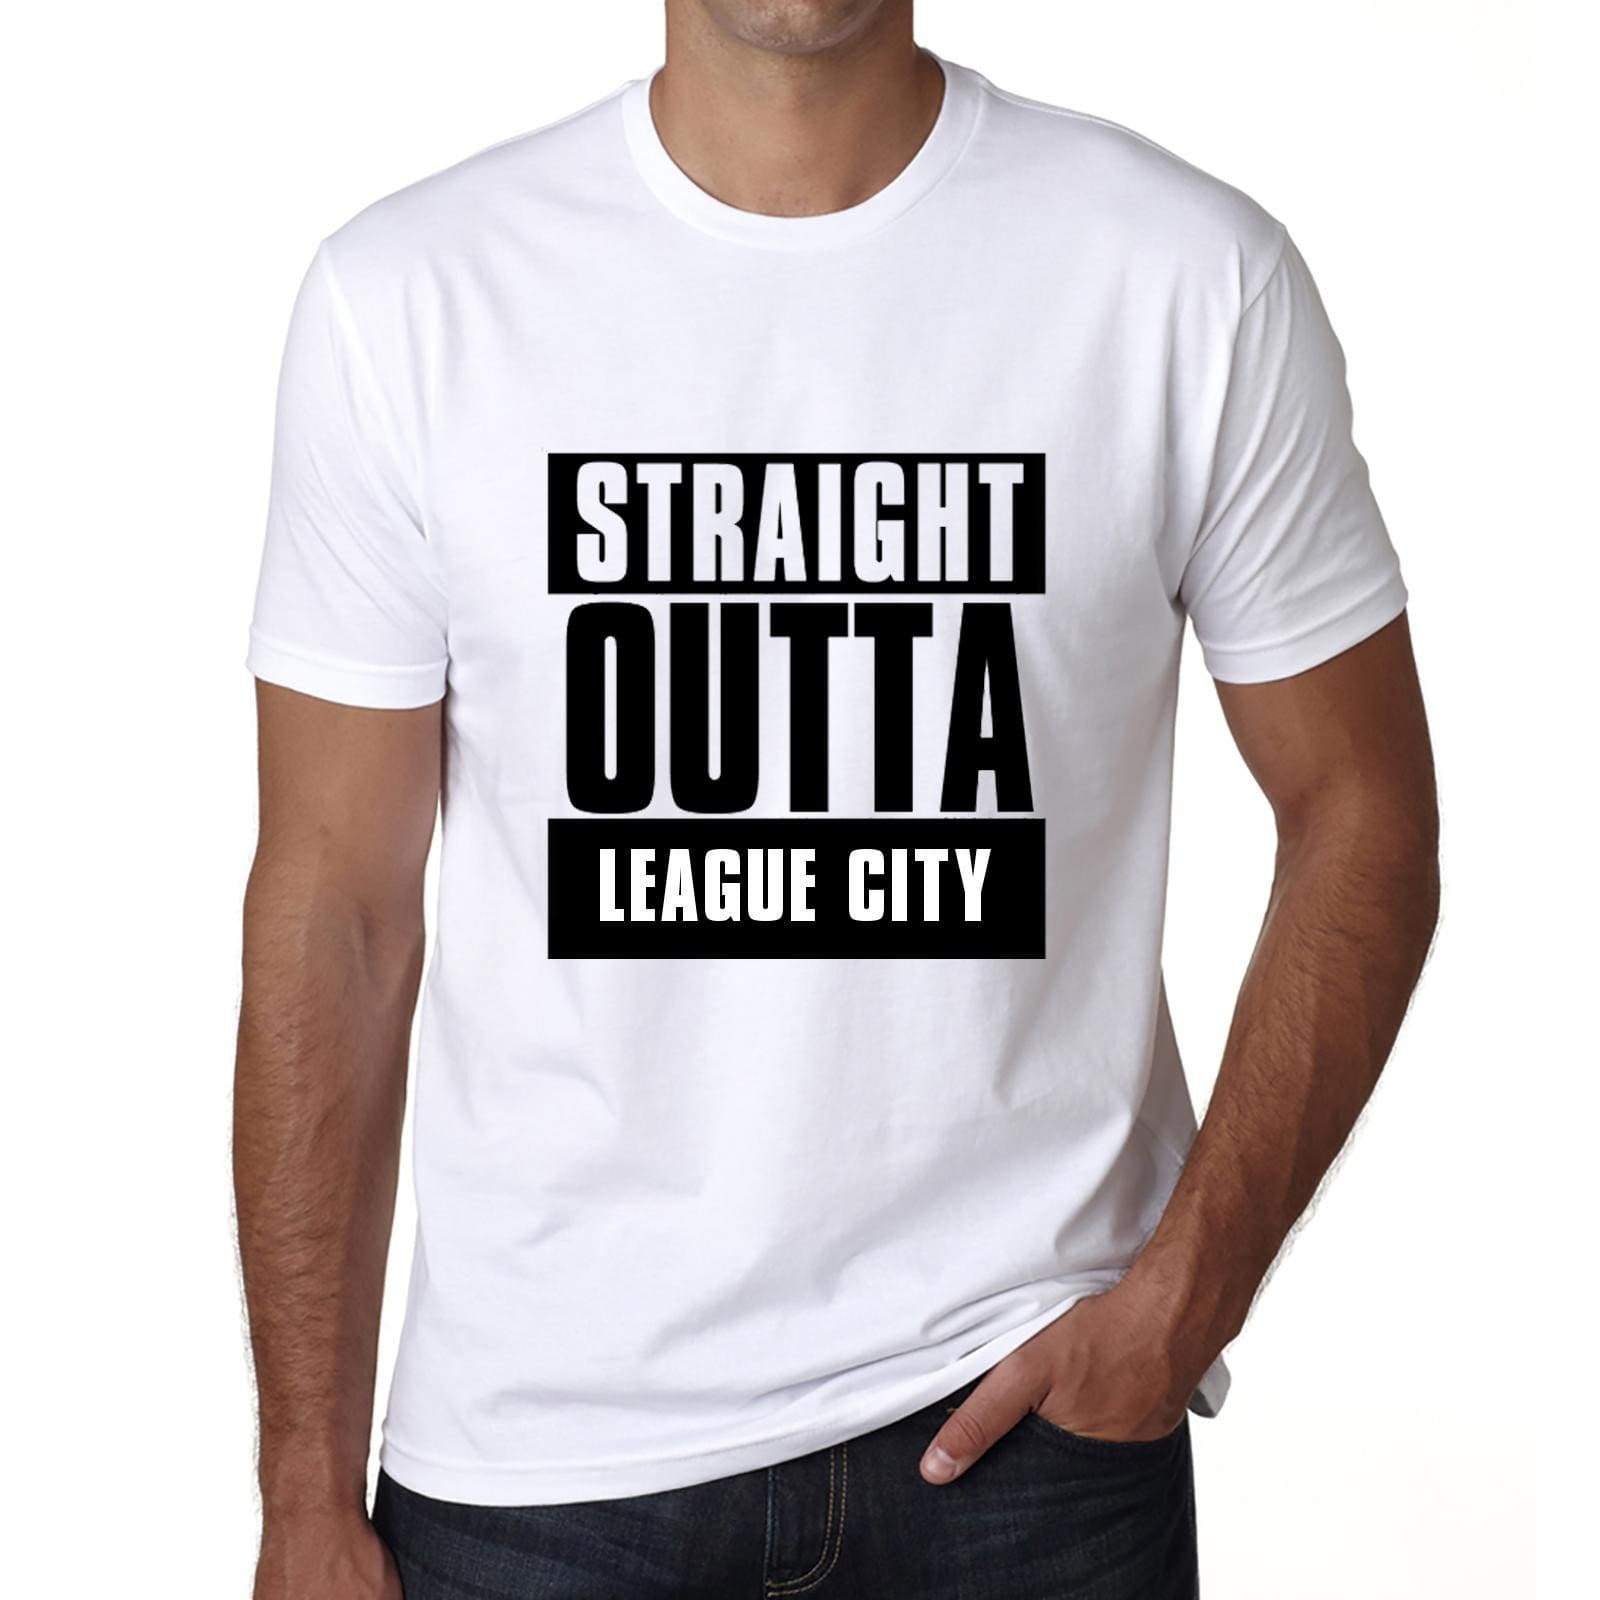 Straight Outta League City Mens Short Sleeve Round Neck T-Shirt 00027 - White / S - Casual